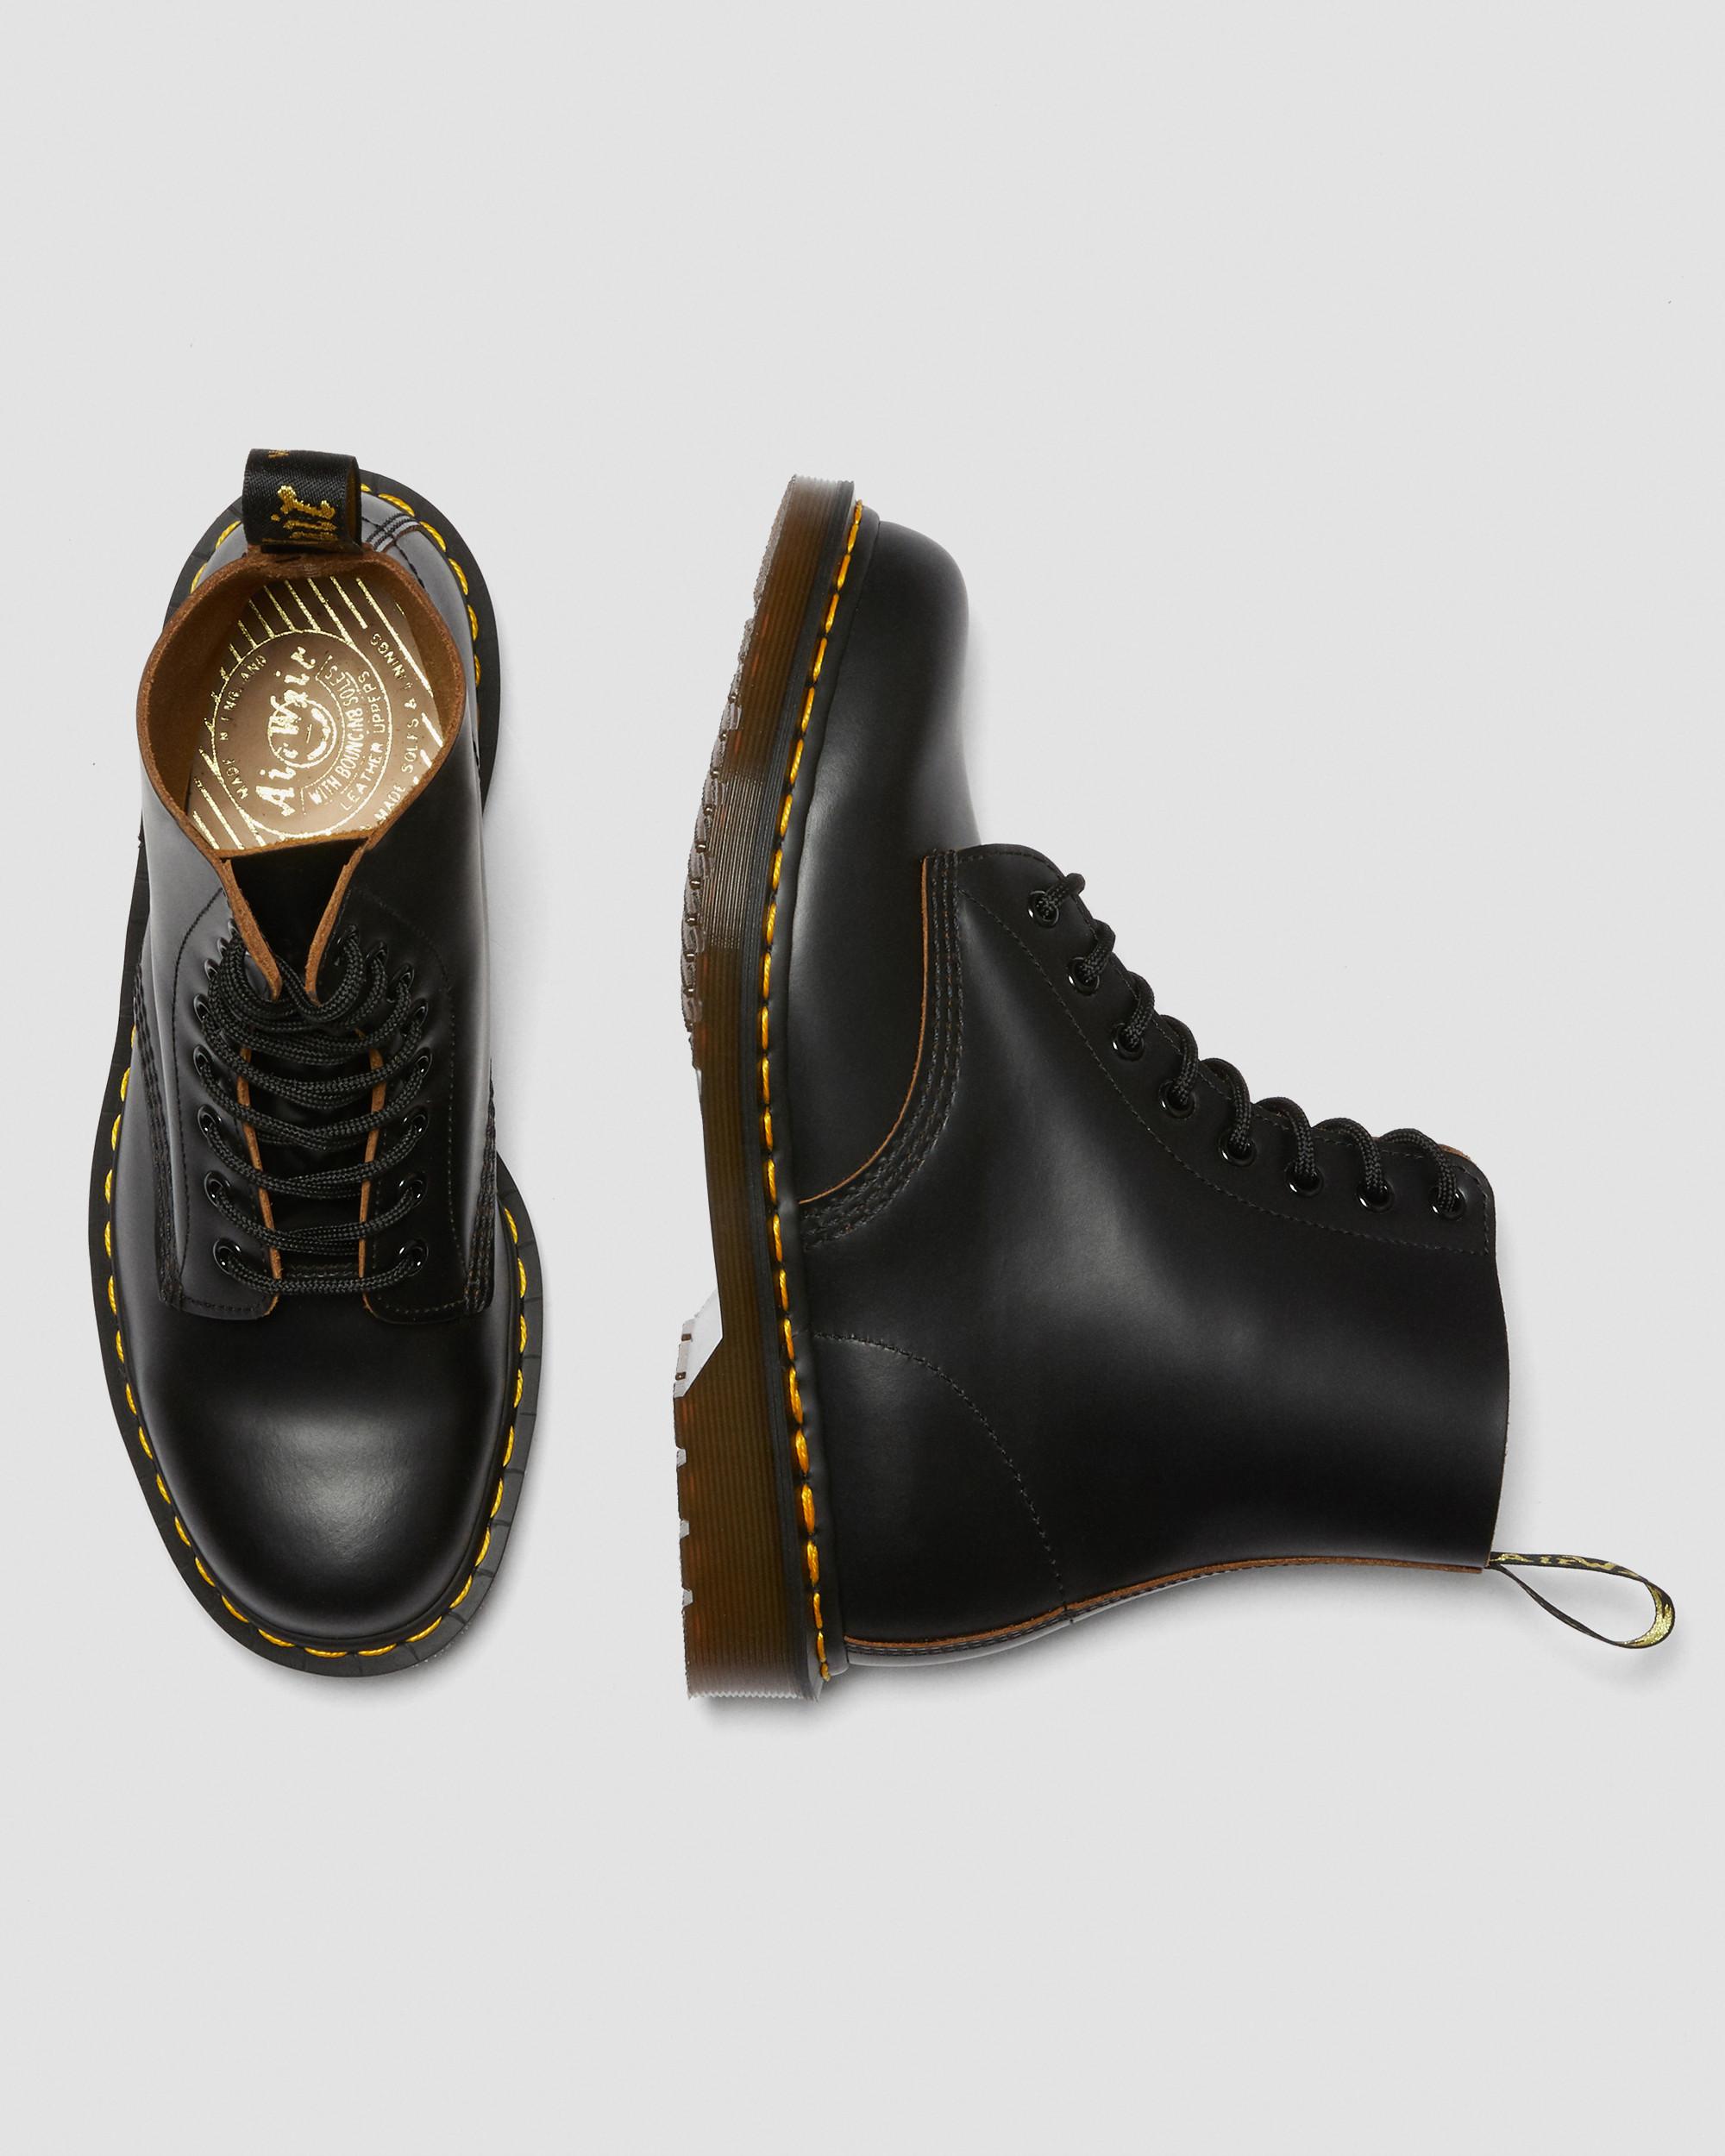 Open Immoraliteit Bijdrager 1460 Vintage Made in England Lace Up Boots | Dr. Martens